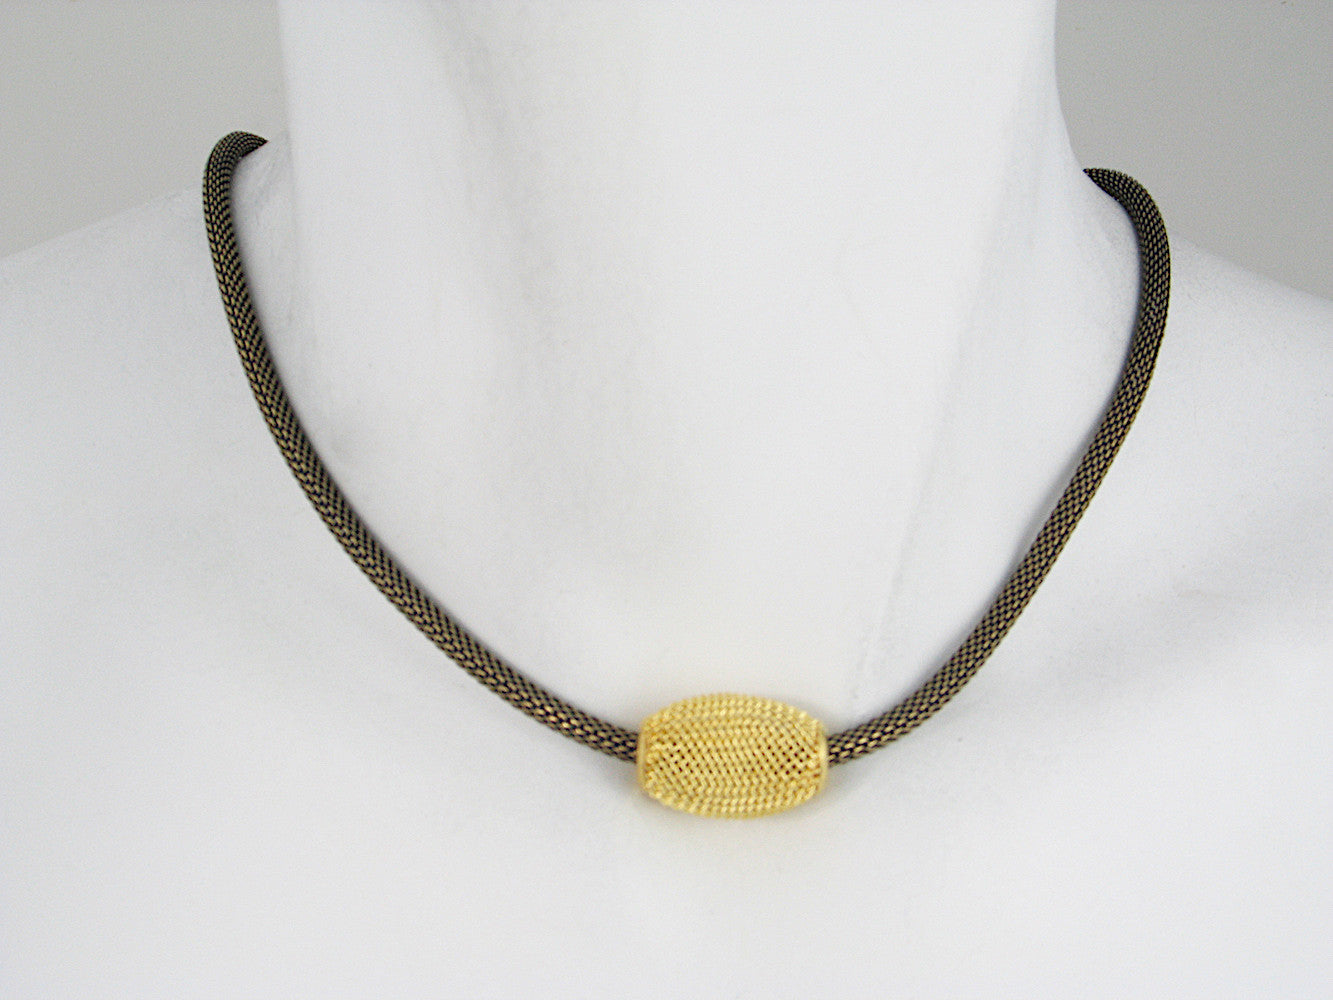 Thin Mesh Necklace with Floating Oval Mesh Bead | Erica Zap Designs